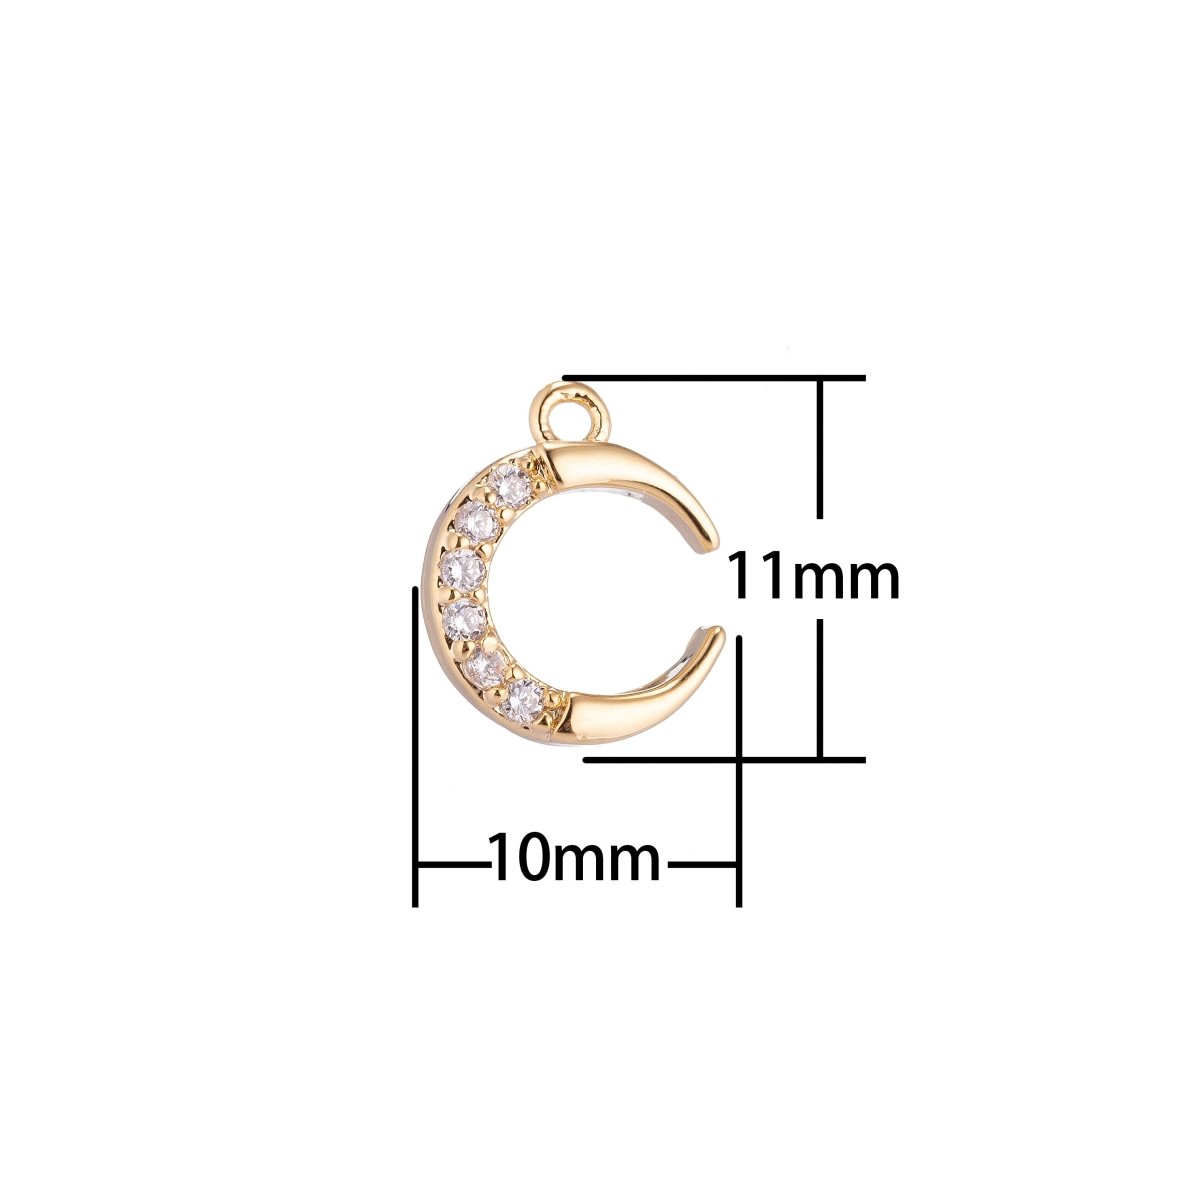 13x8.5MM Crescent Moon Charm or Pendant, Cubic Zirconia 18k Gold Filled for Chocker Layer Necklace Jewelry Making C-150 - DLUXCA